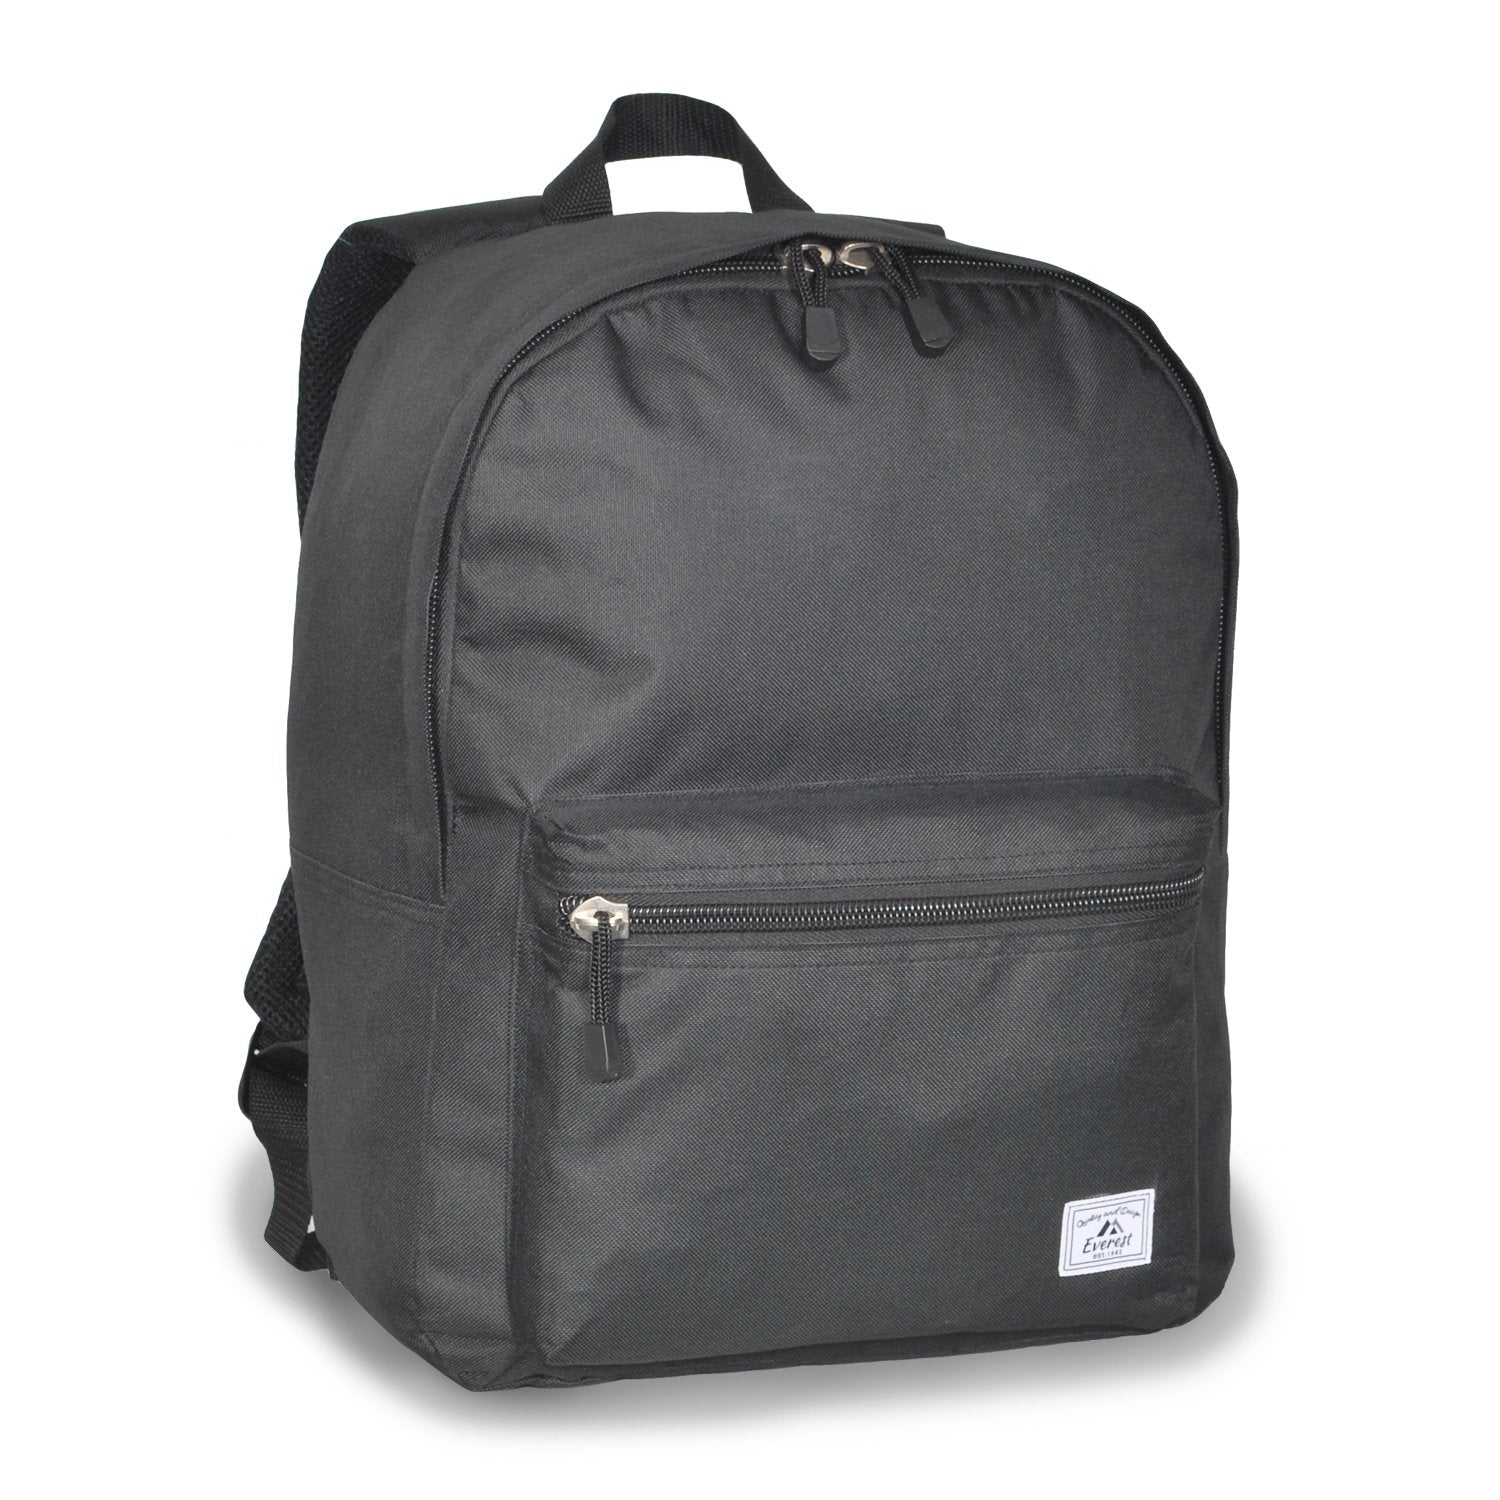 Everest-Deluxe Laptop Backpack